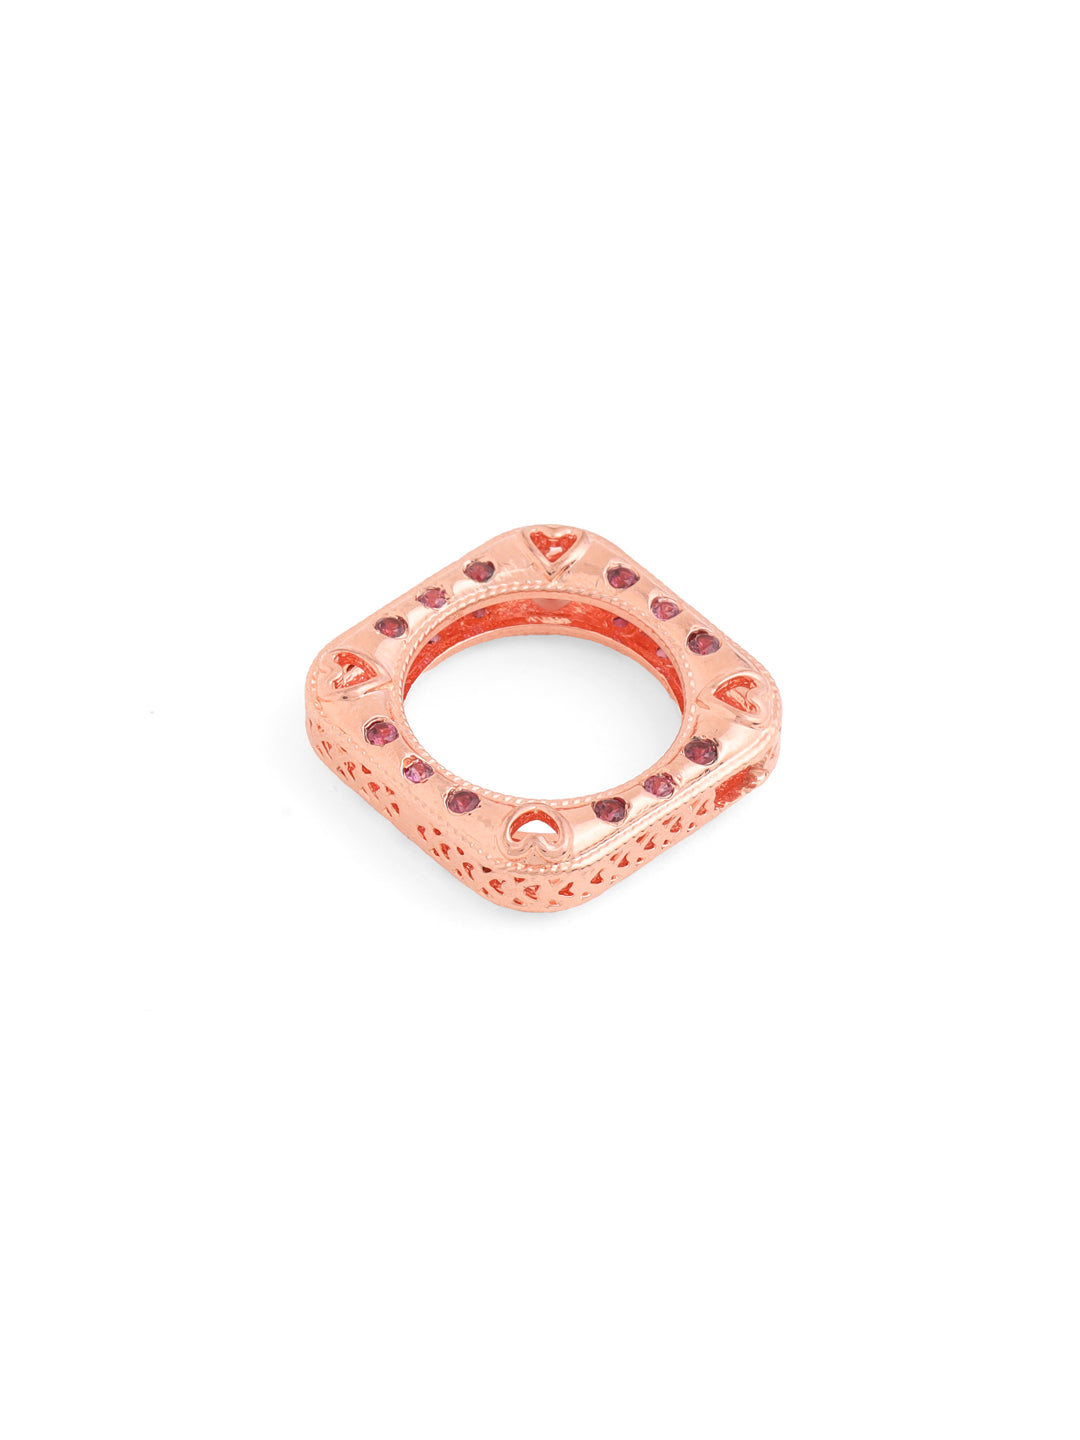 The Dual Charm Ring-Pendant